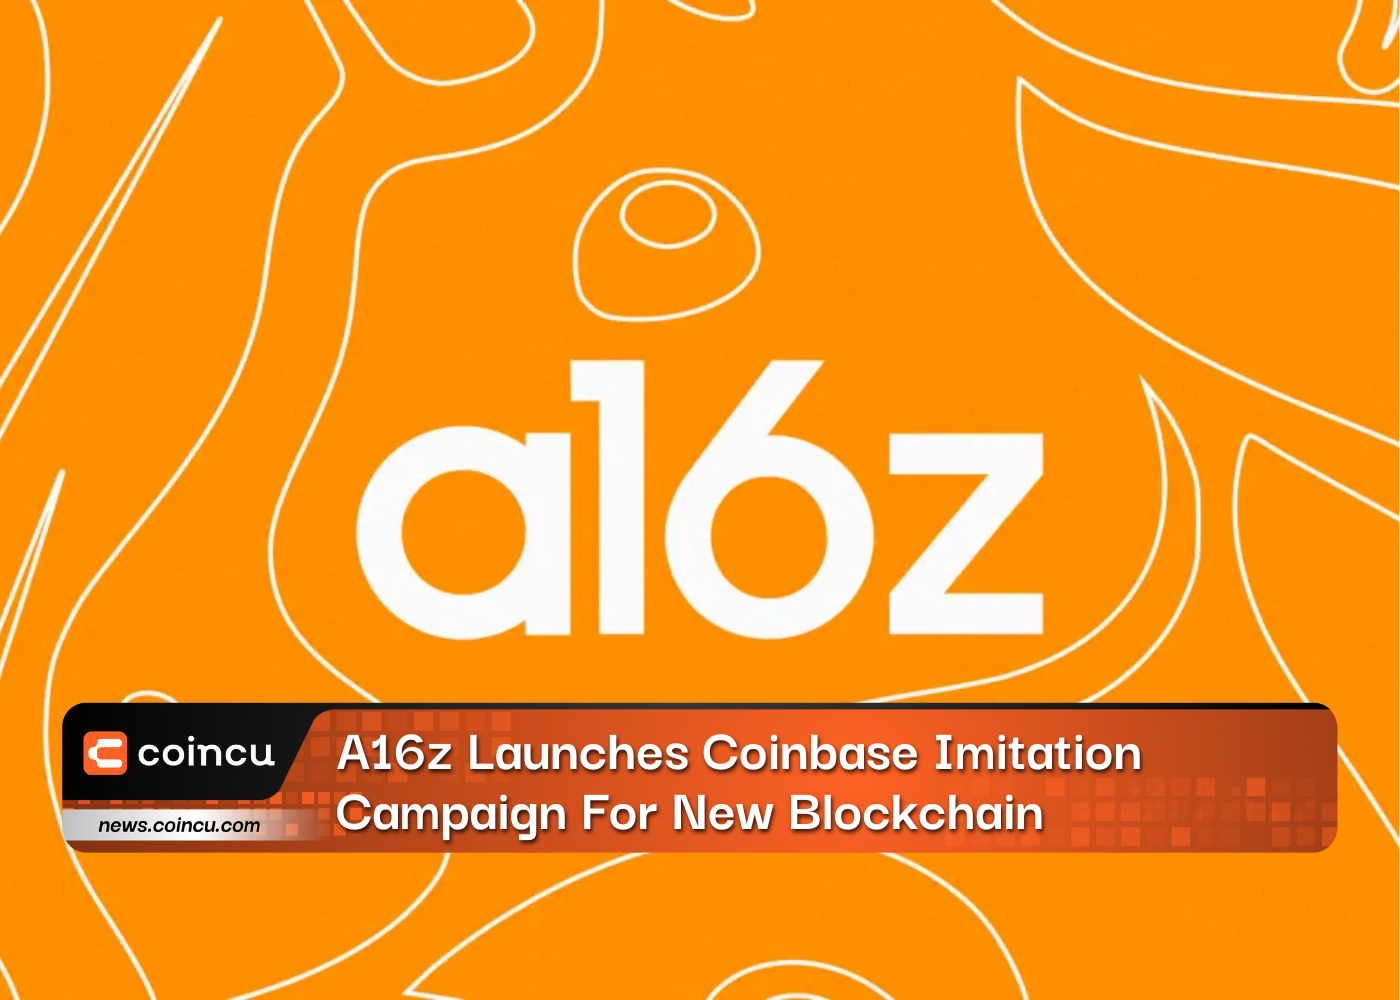 A16z Launches Coinbase Imitation Campaign For New Blockchain